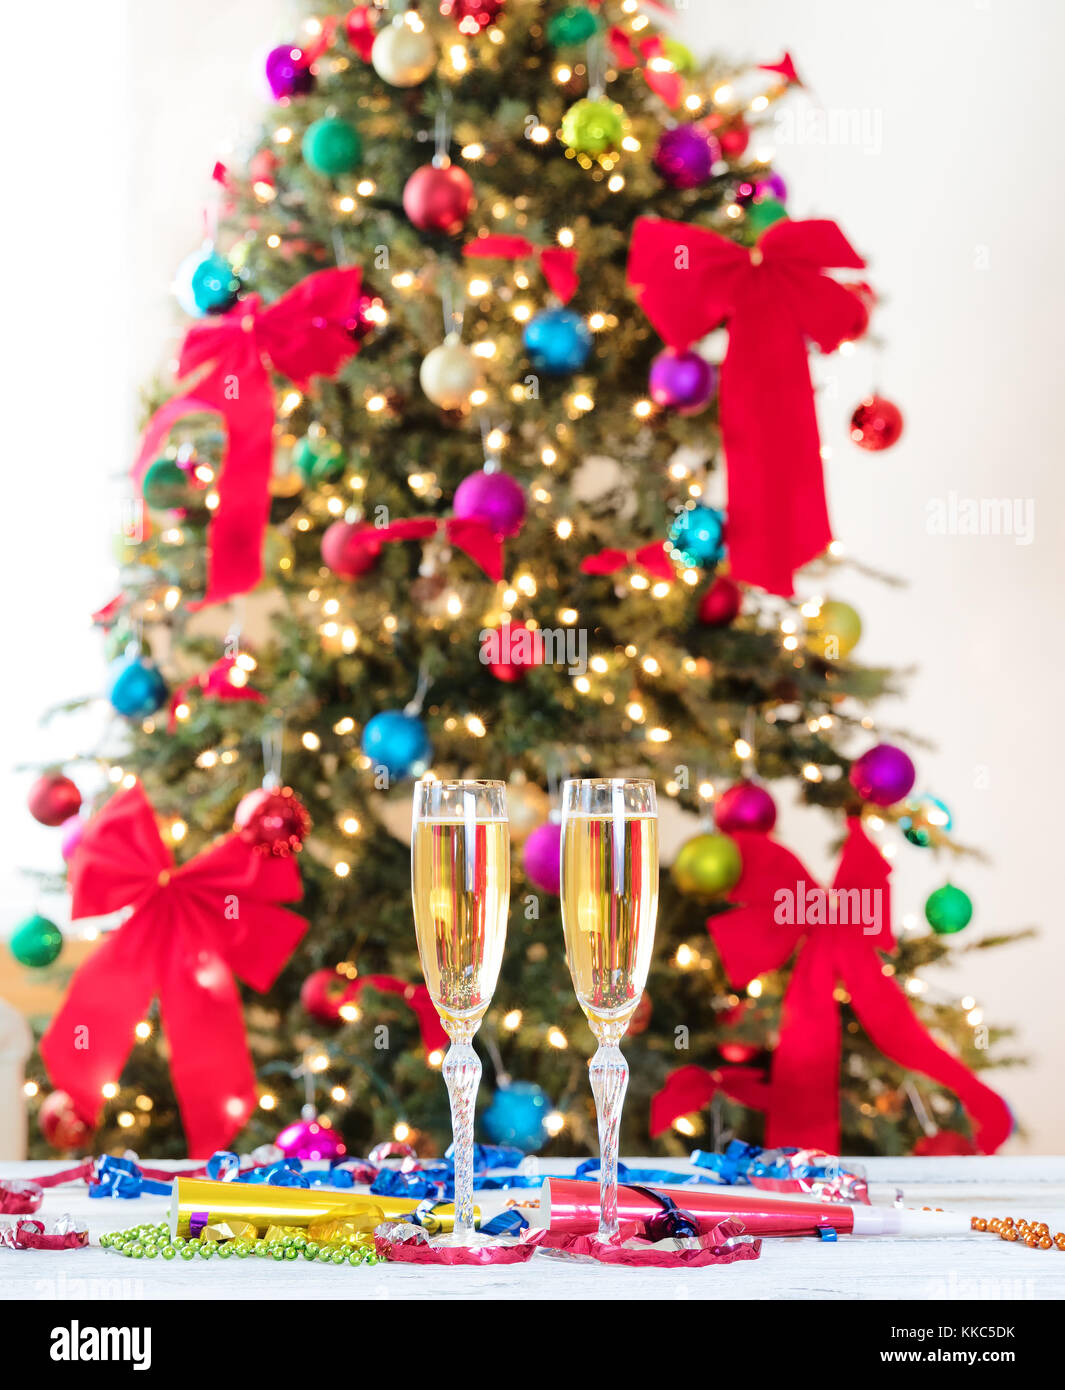 New Year party objects with Christmas tree in background Stock Photo